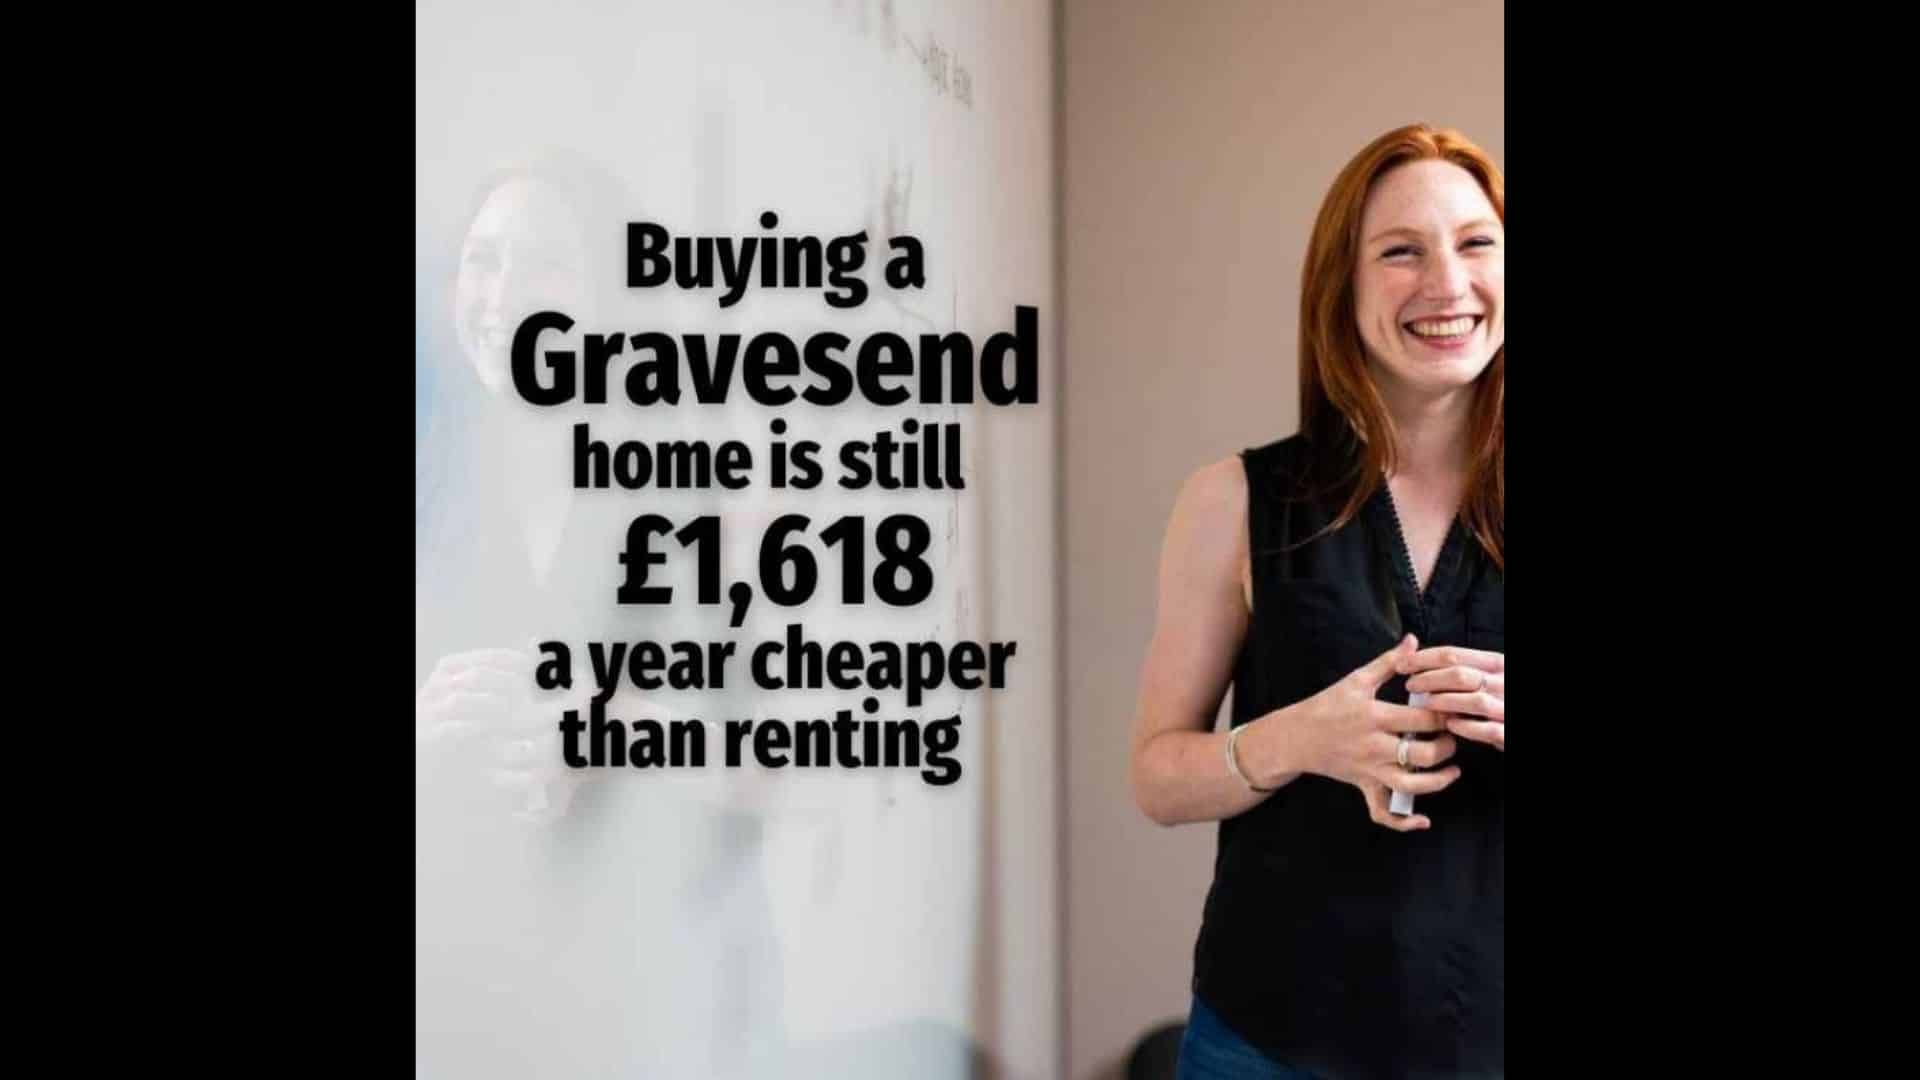 Buying A Gravesend Home Is Still £1,618 A Year Cheaper Than Renting